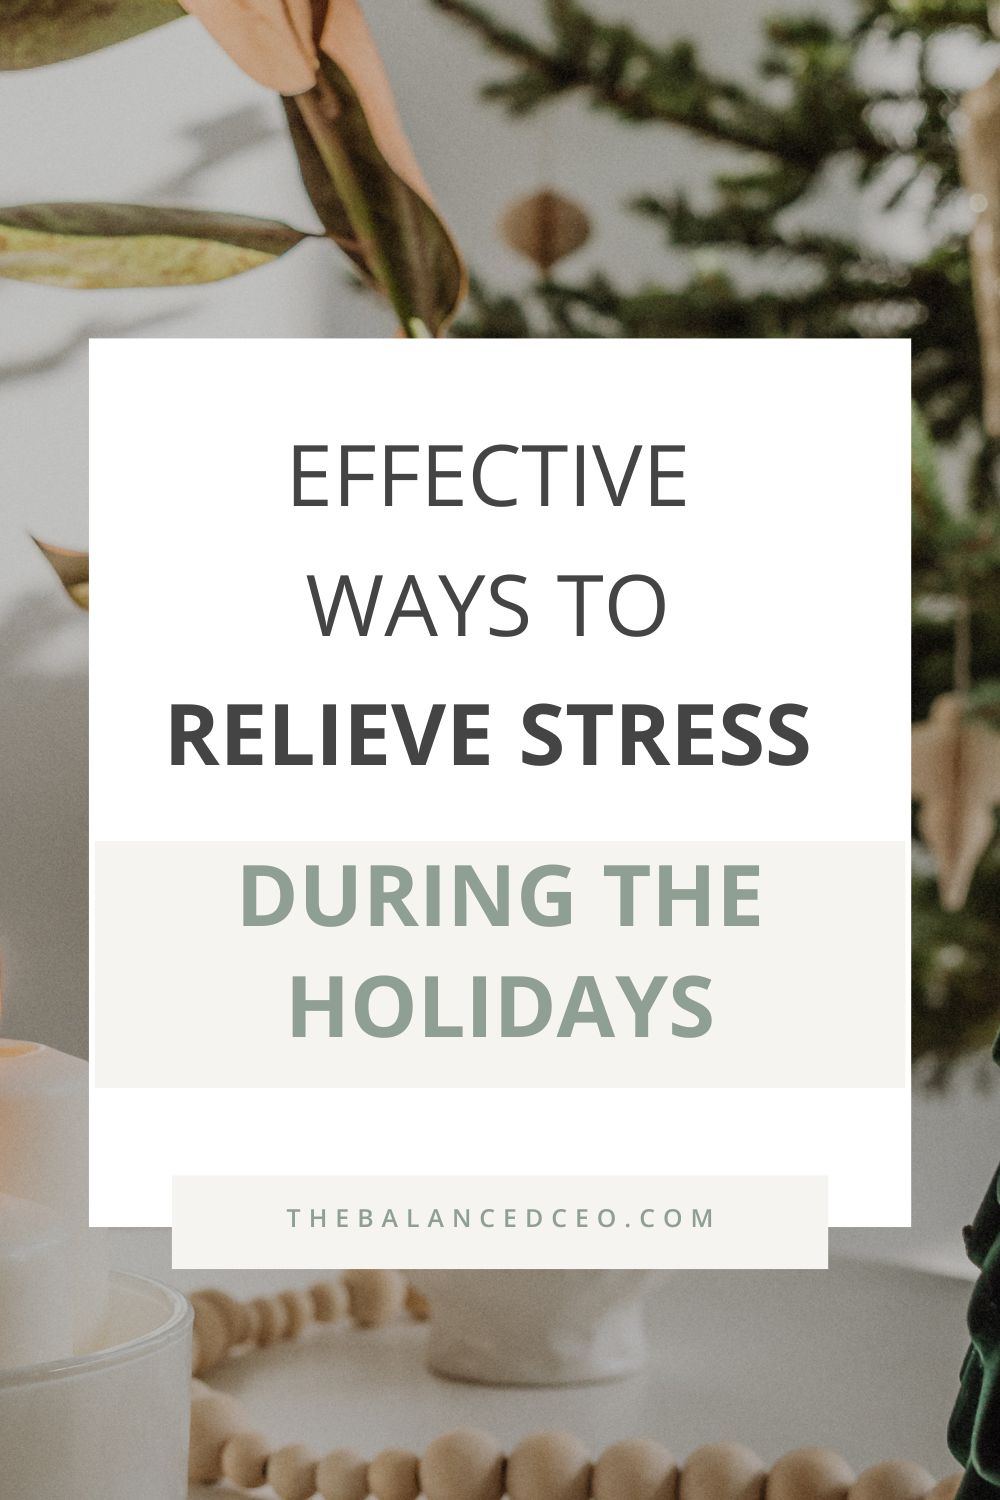 Effective Ways to Relieve Stress During the Holidays, From Work to Finances